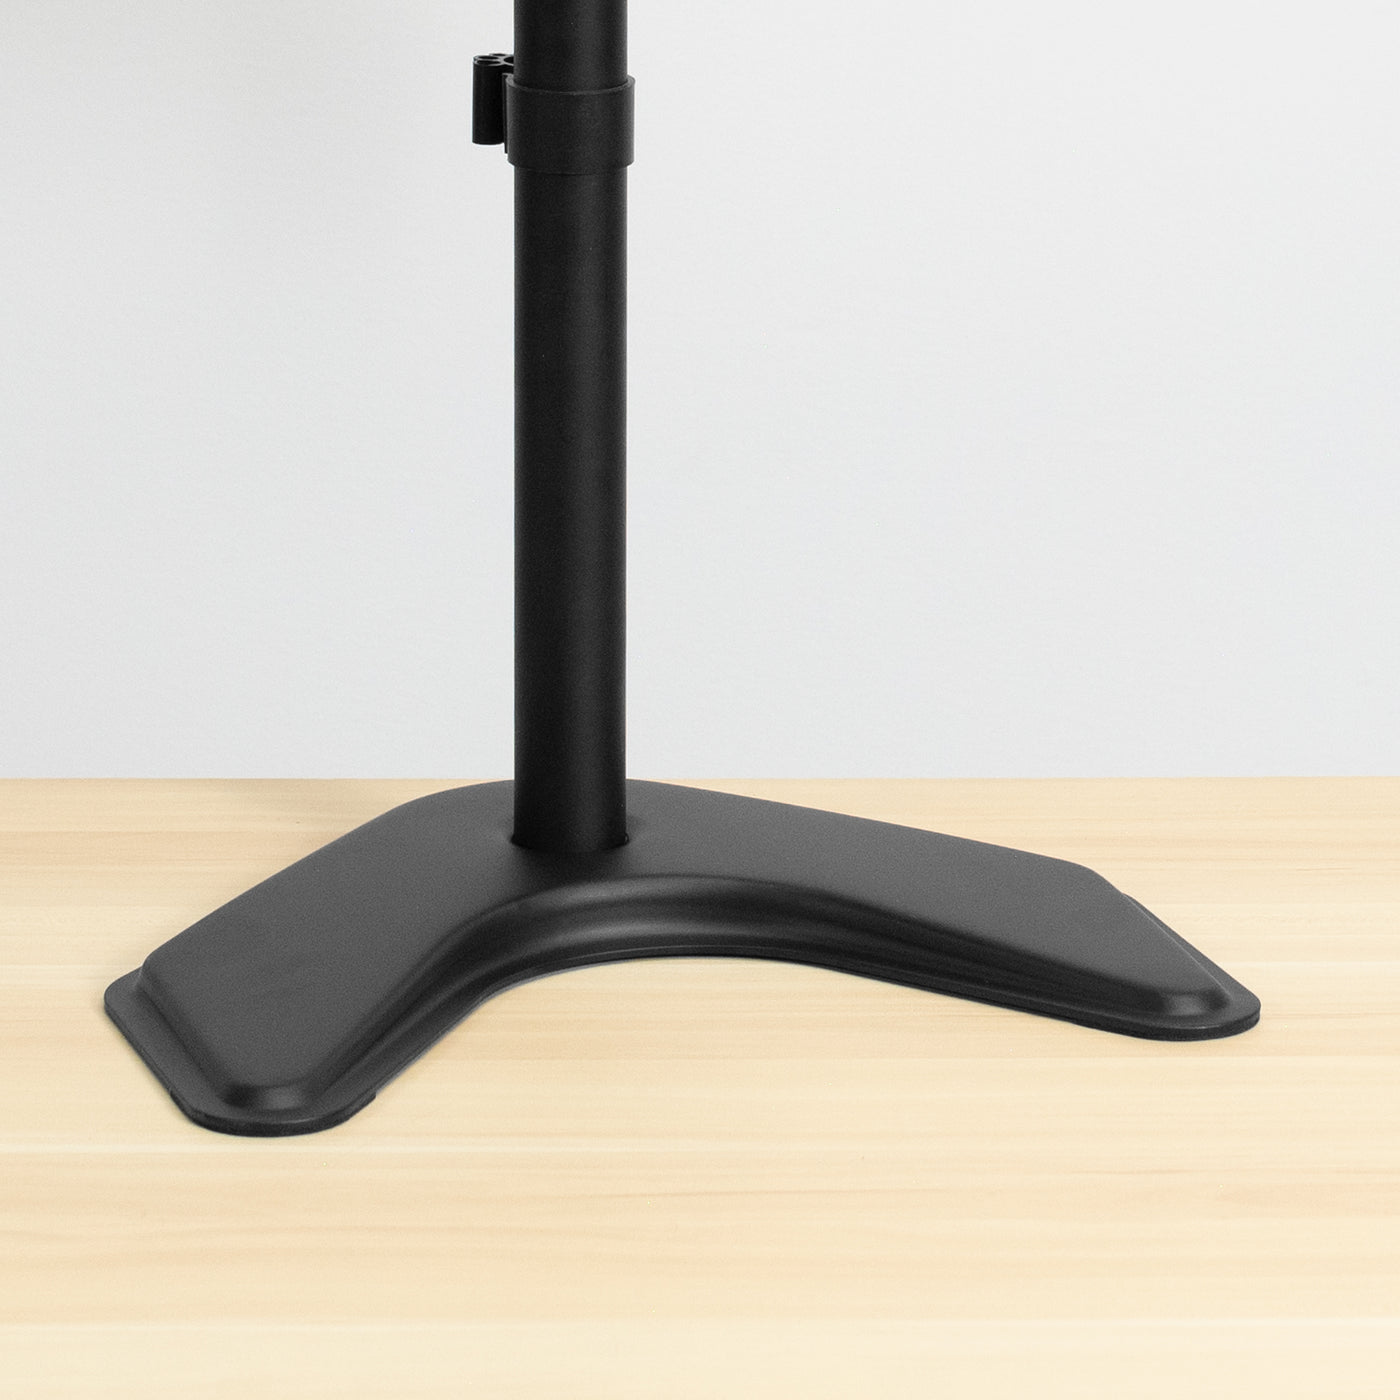 Free standing monitor mount base from VIVO.